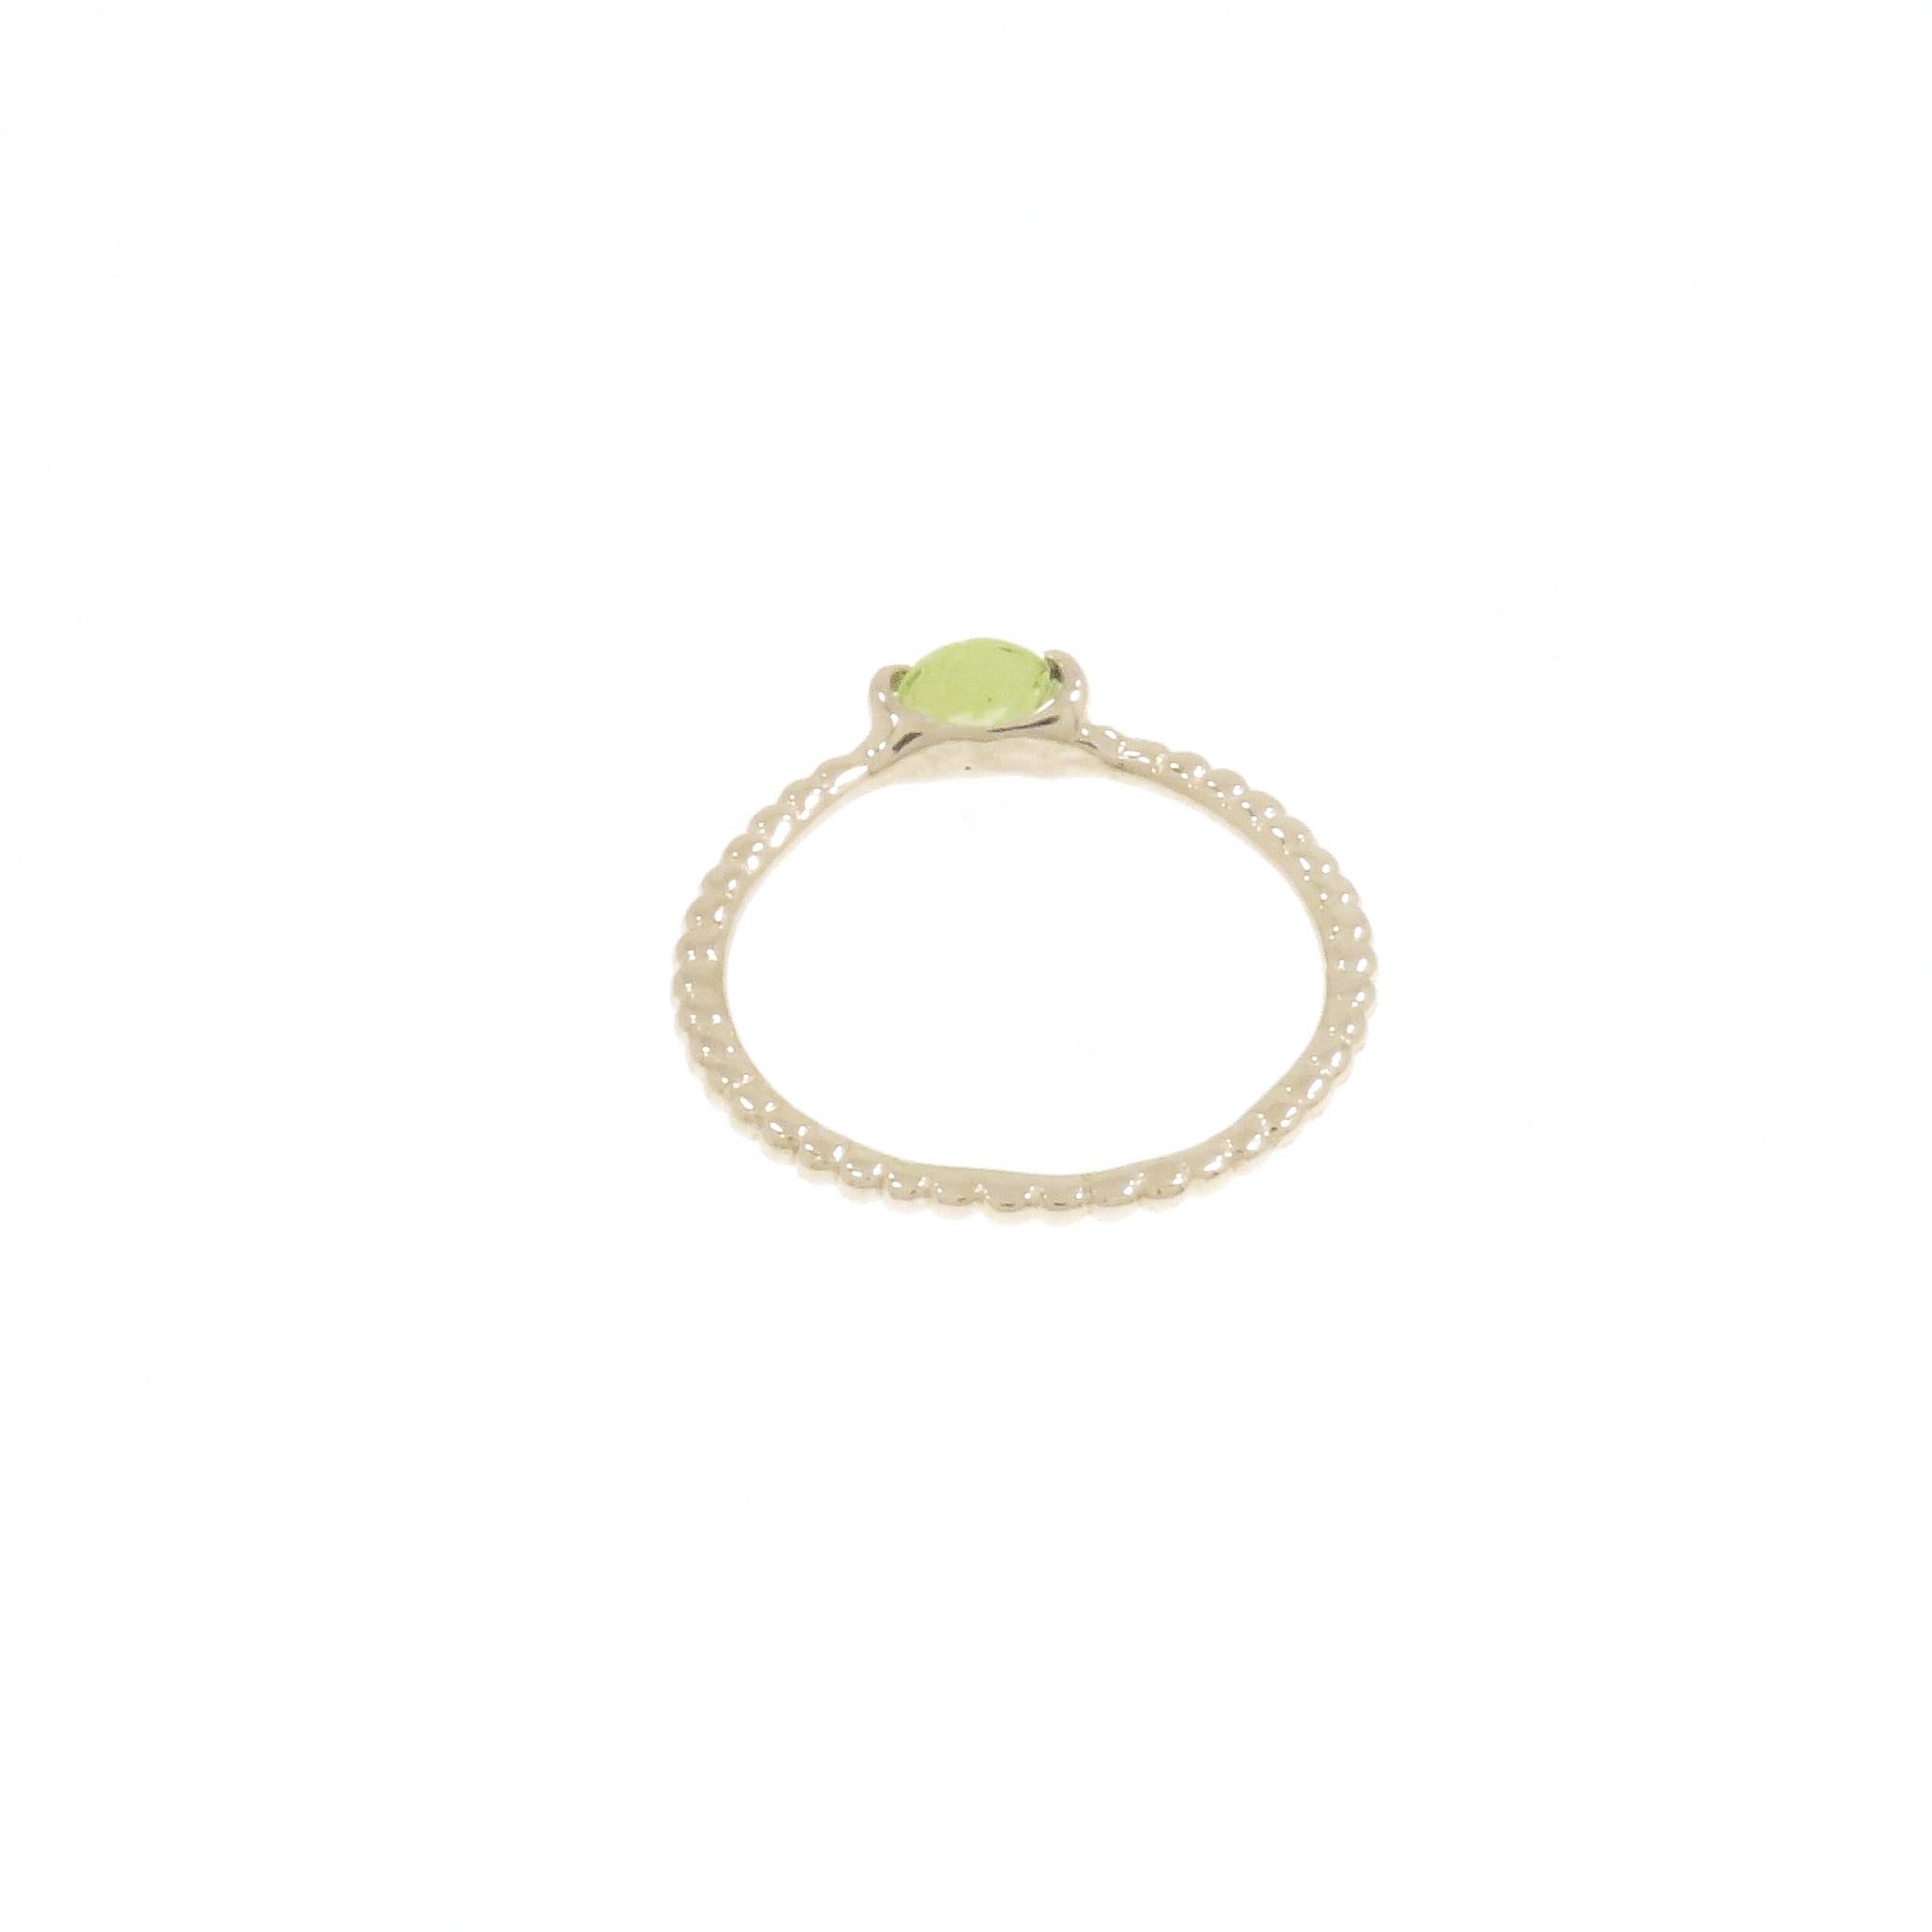 Women's Peridot Withe Gold Stacking Ring Handcrafted in Italy by Botta Gioielli